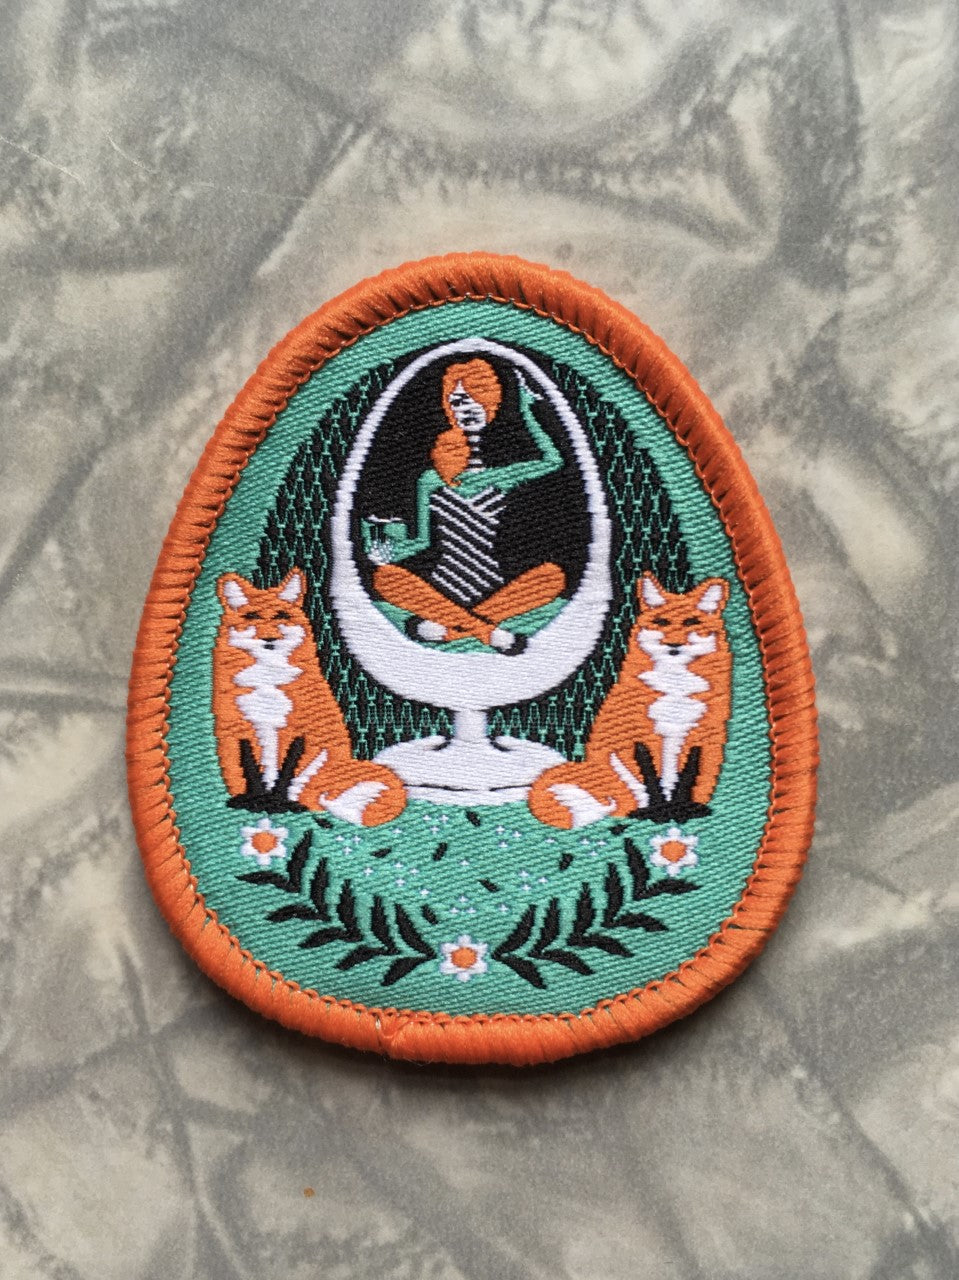 Green and orange iron-on patch featuring a girl in an egg chair with 2 foxes and flower accents